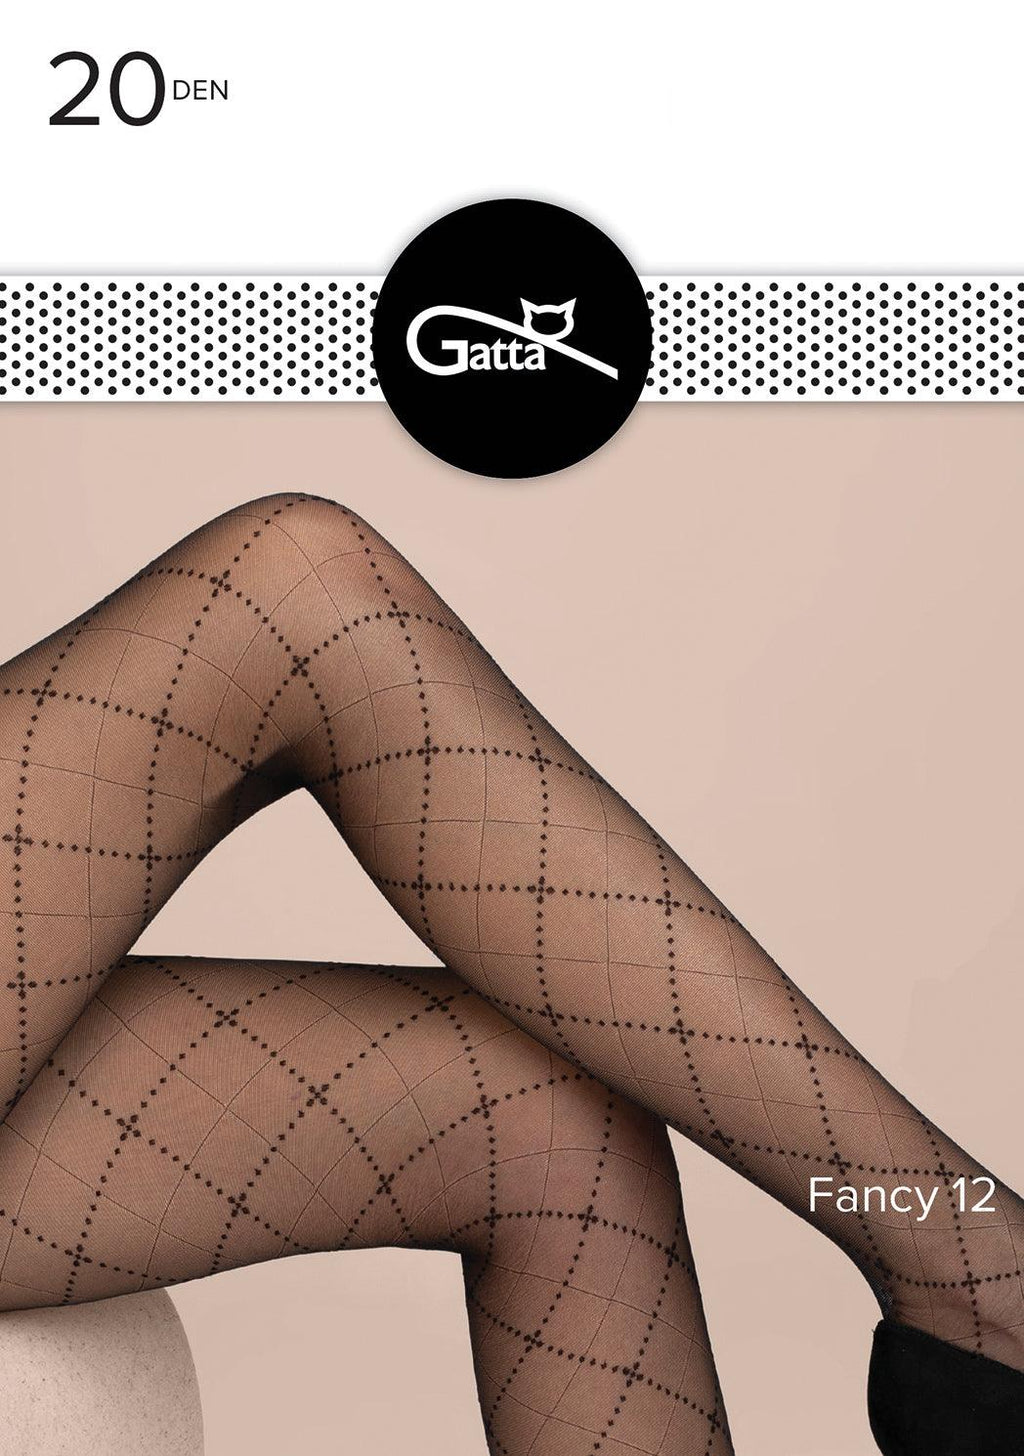 Gatta Women's Luxurious Black FISHNET TIGHTS with Lace Panty and